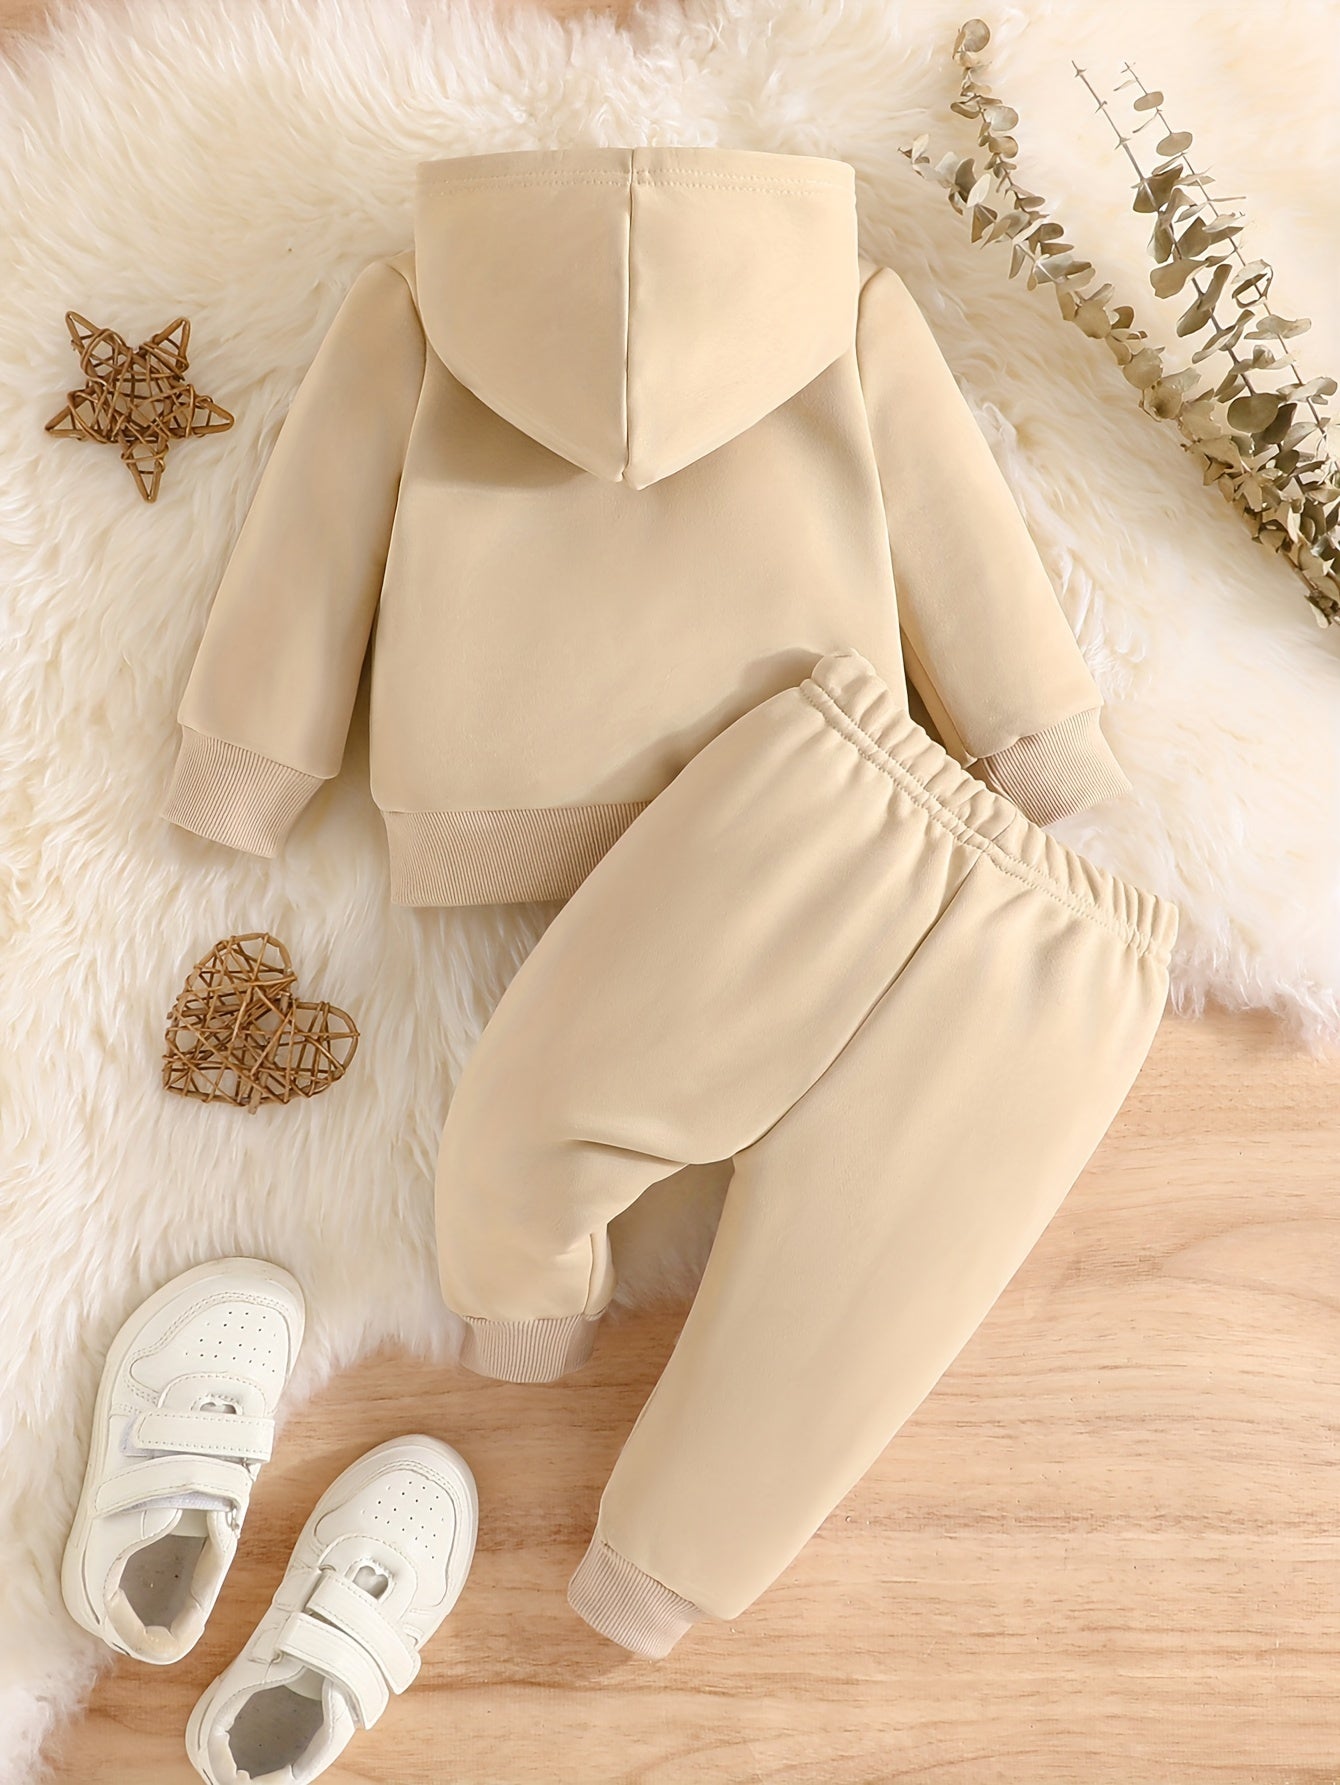 Baby Boy's Sweatsuit, Trendy Letter Graphic Long Sleeve Hoodie & Pants Set For Autumn And Winter